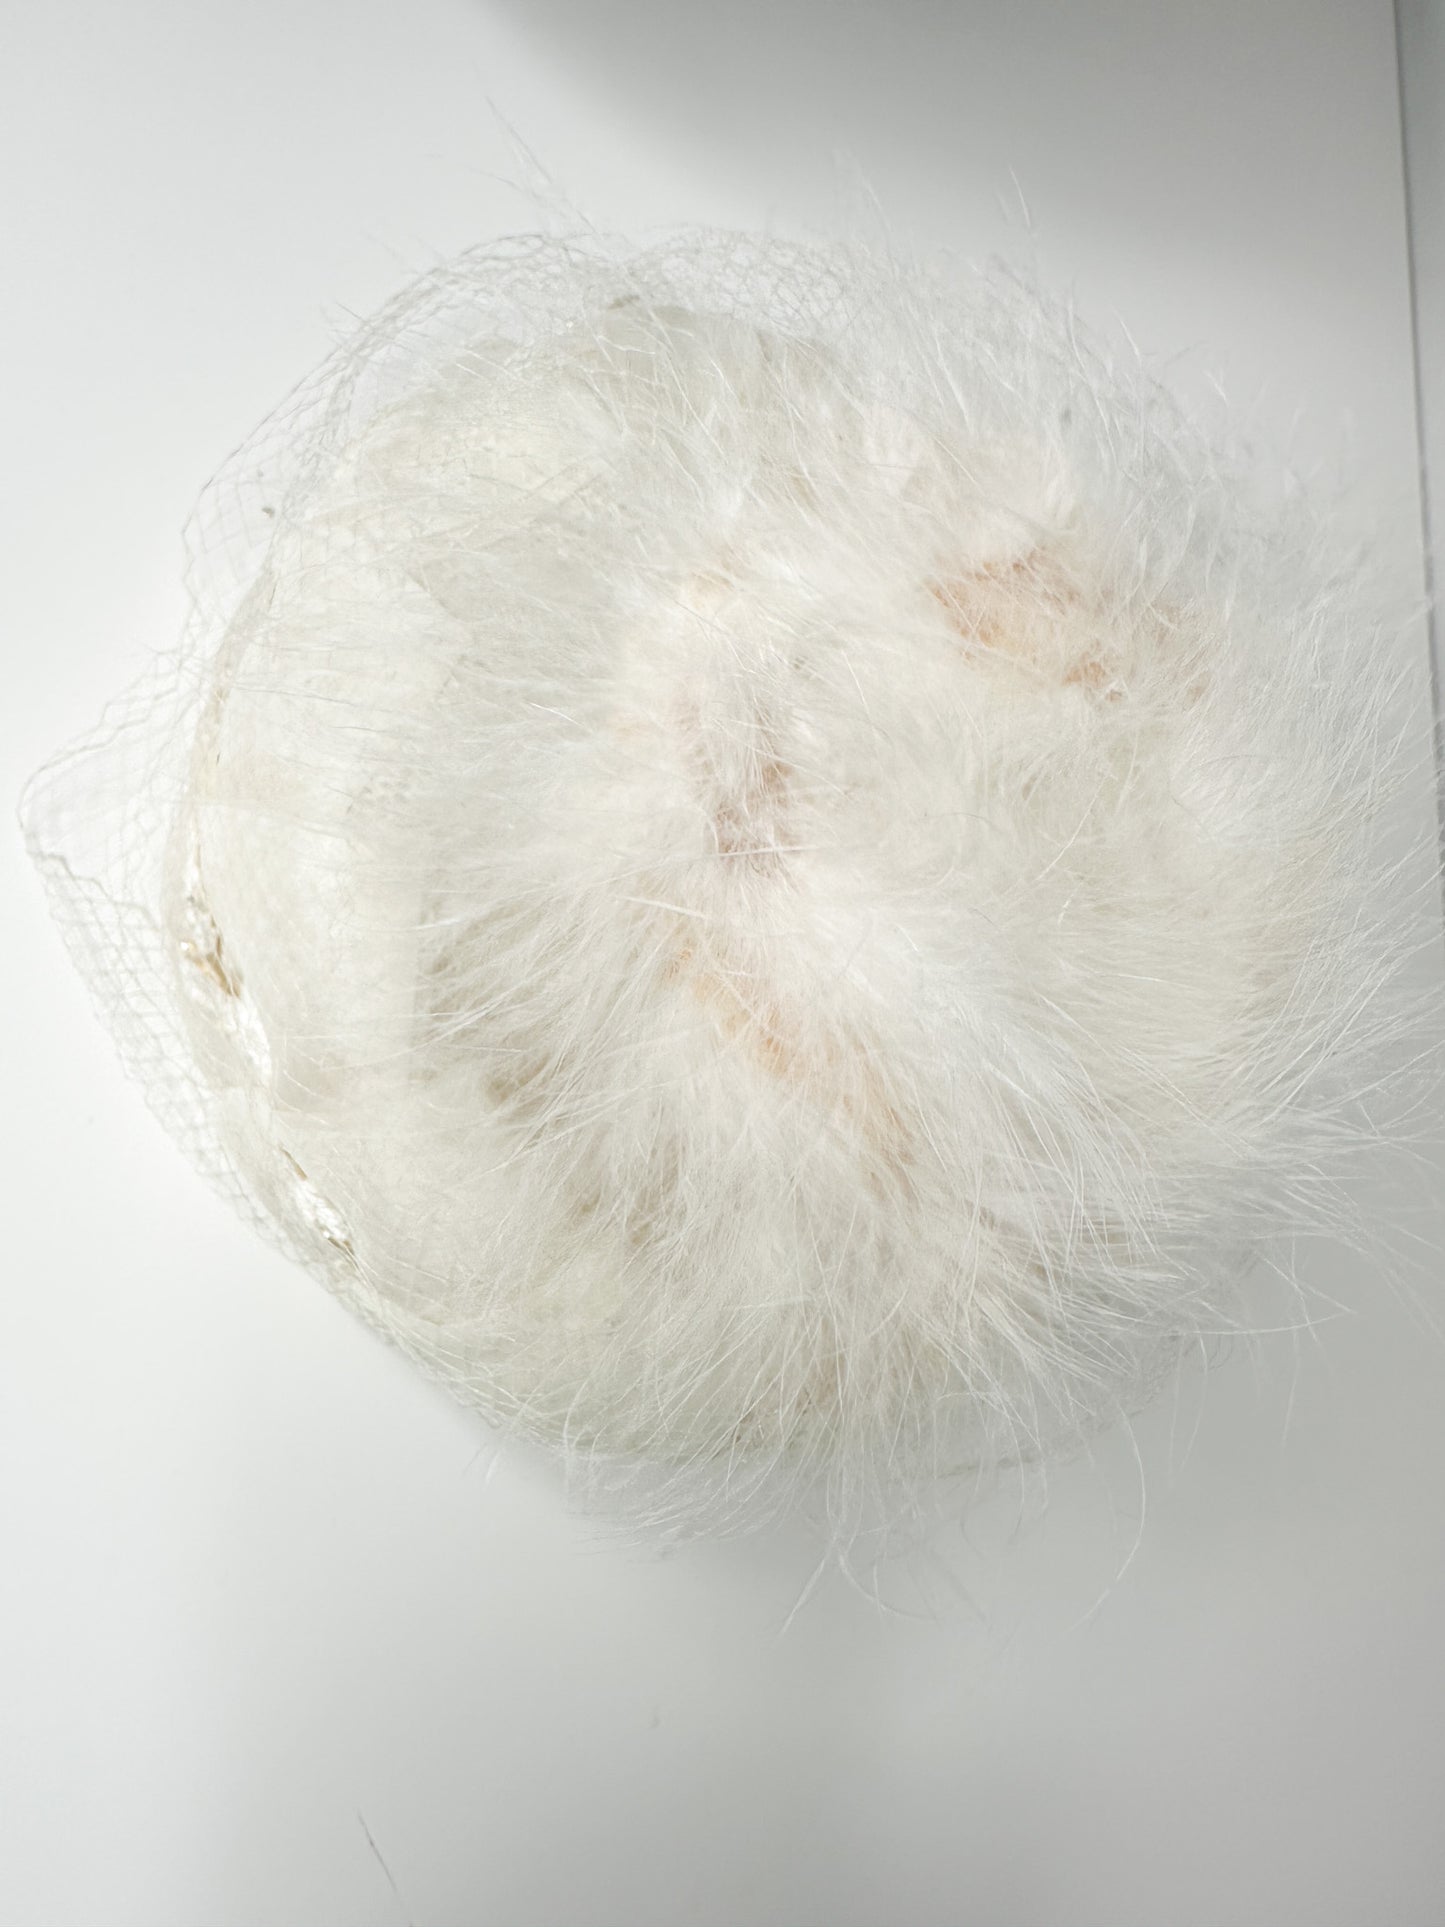 Vintage White Velvet Veiled Wedding Hat with Feather Detail |Veiled Vintage Woven Pill box Hat | 1960s rounded hat